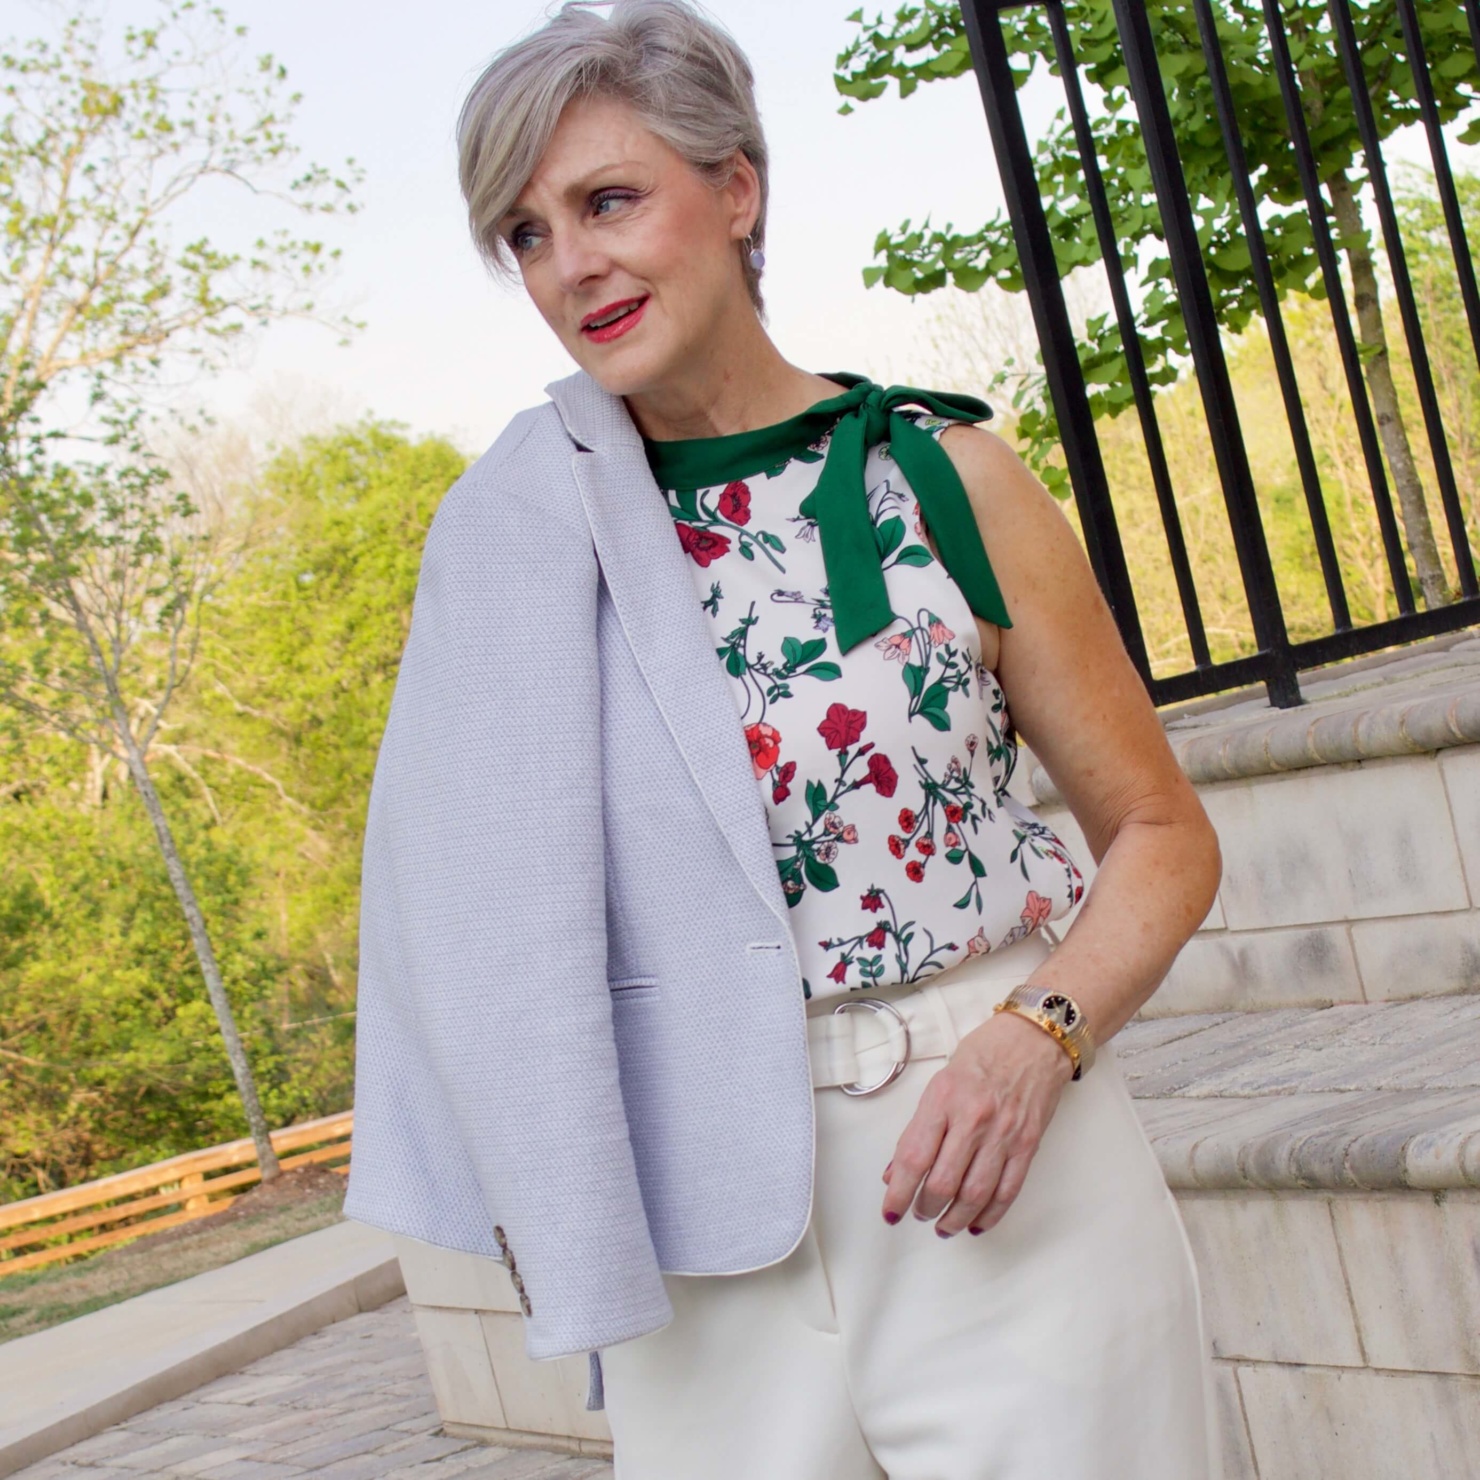 beth from Style at a Certain Age wears a textured blazer and floral sleeveless blouse